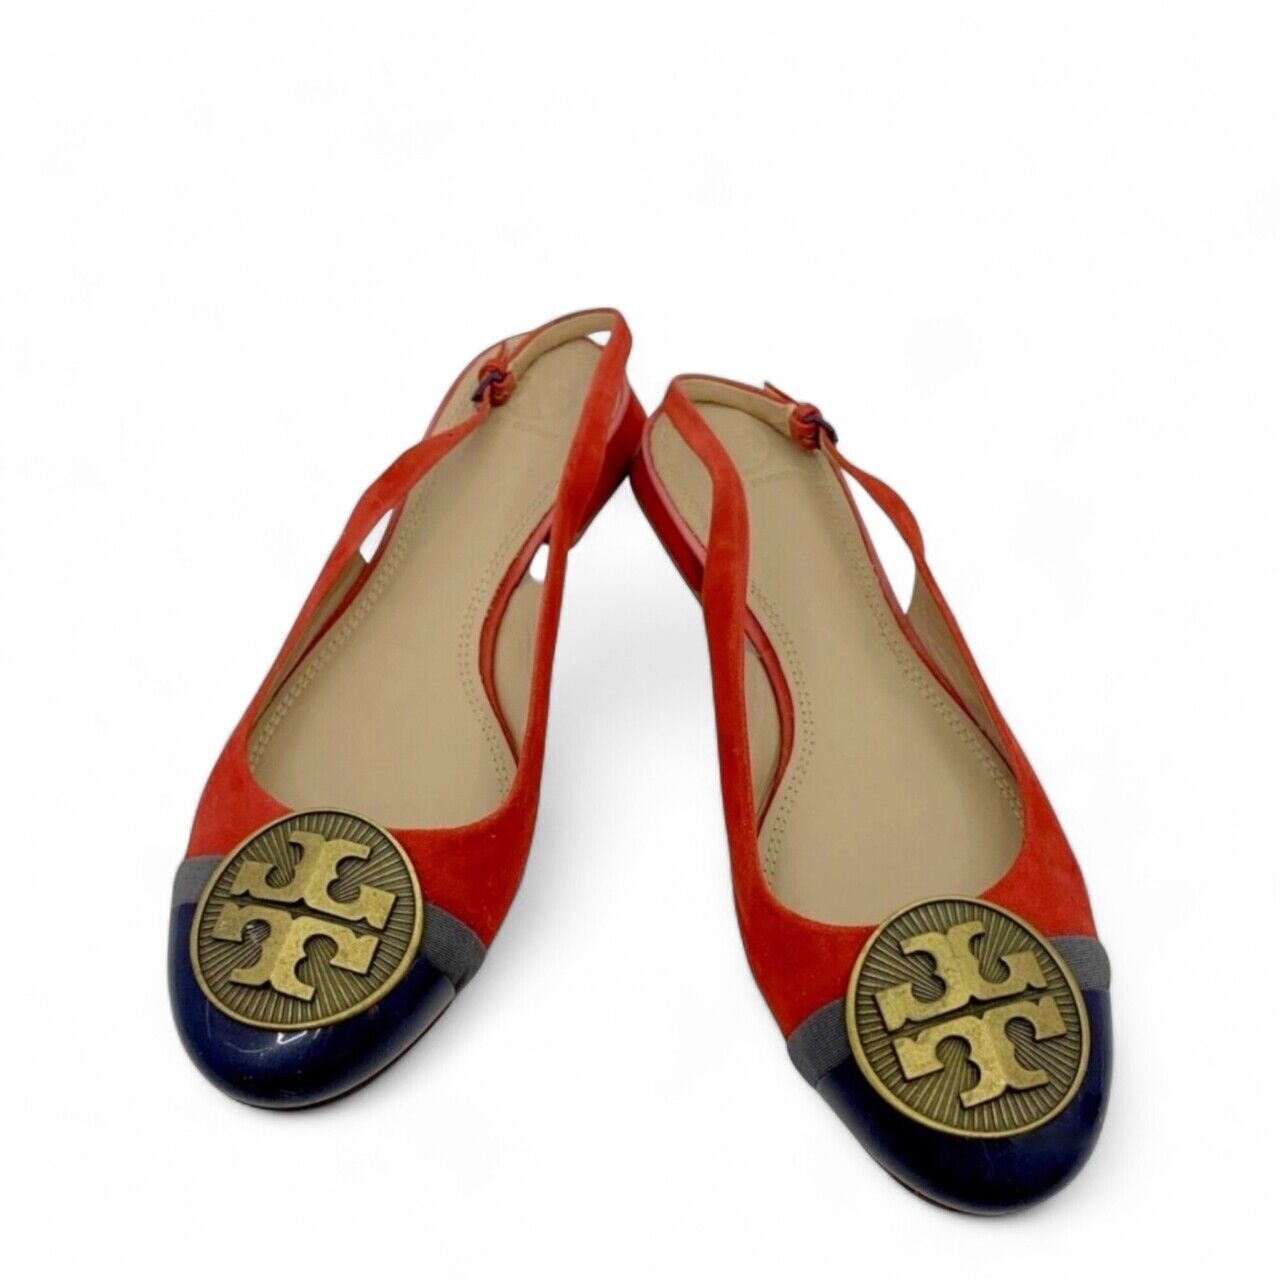 Tory Burch Red Suede Slingback Flats